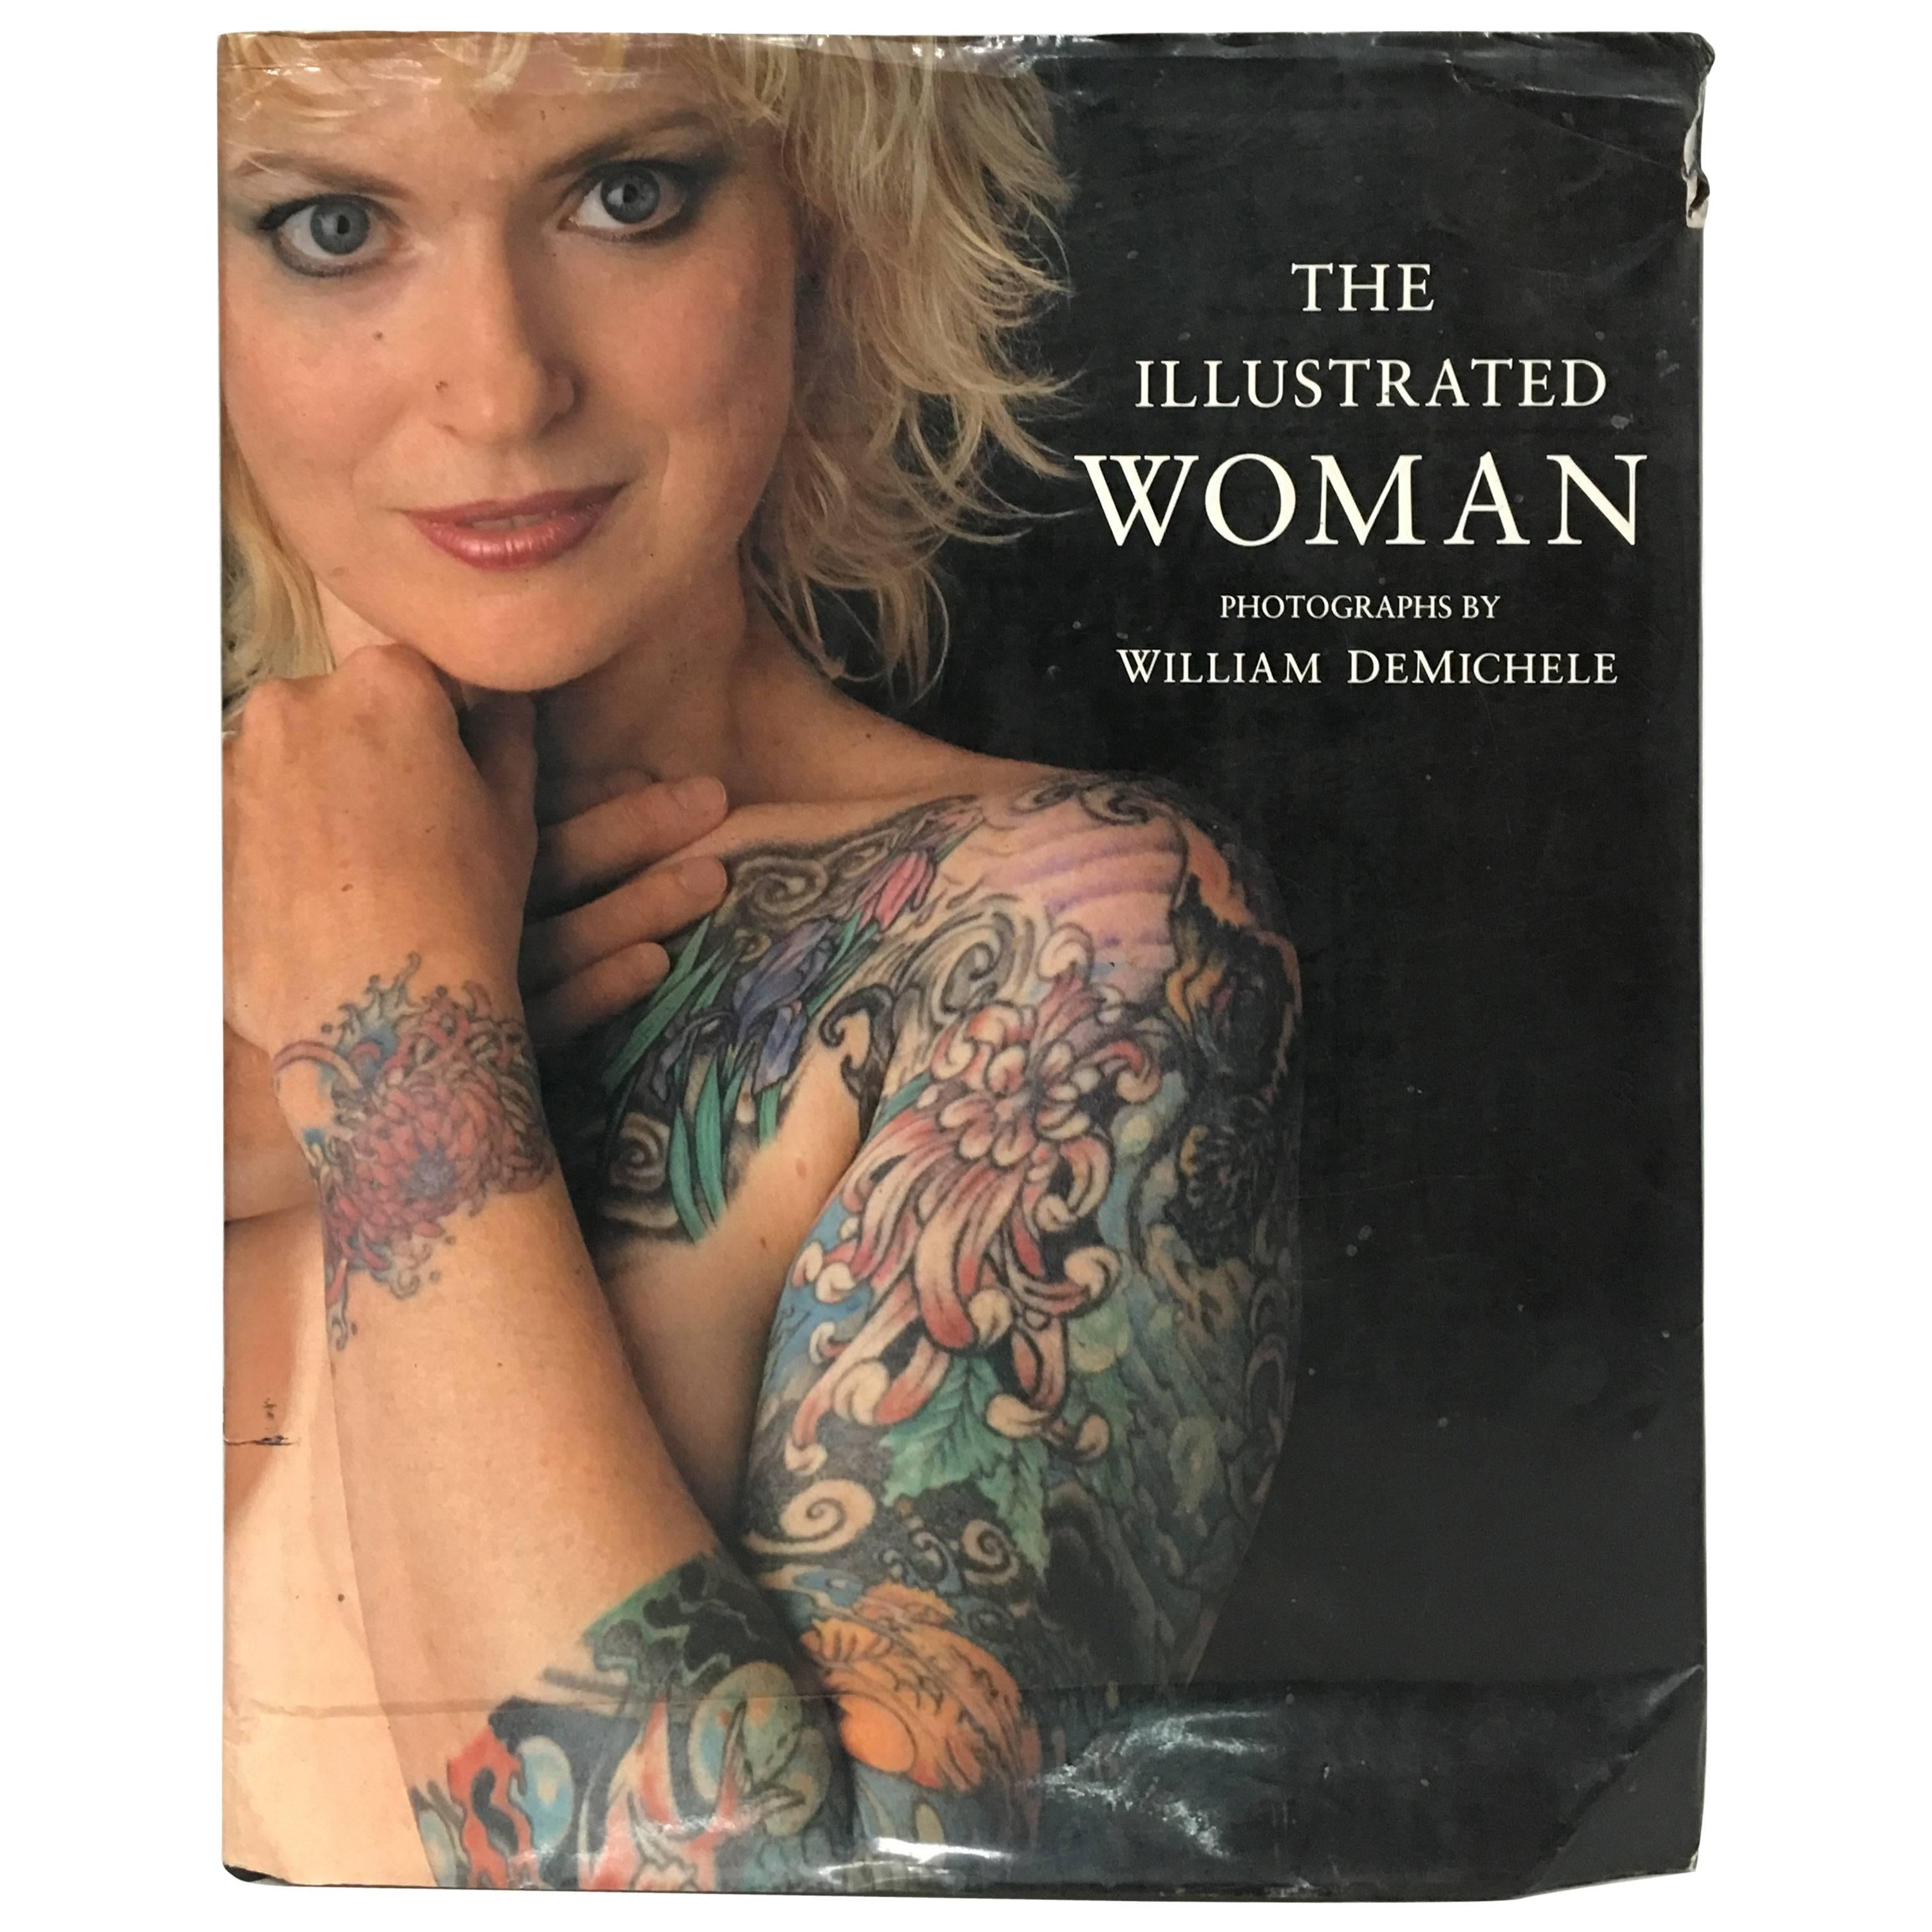 "The Illustrated Woman" Hardcover Book by William Demichele 1993